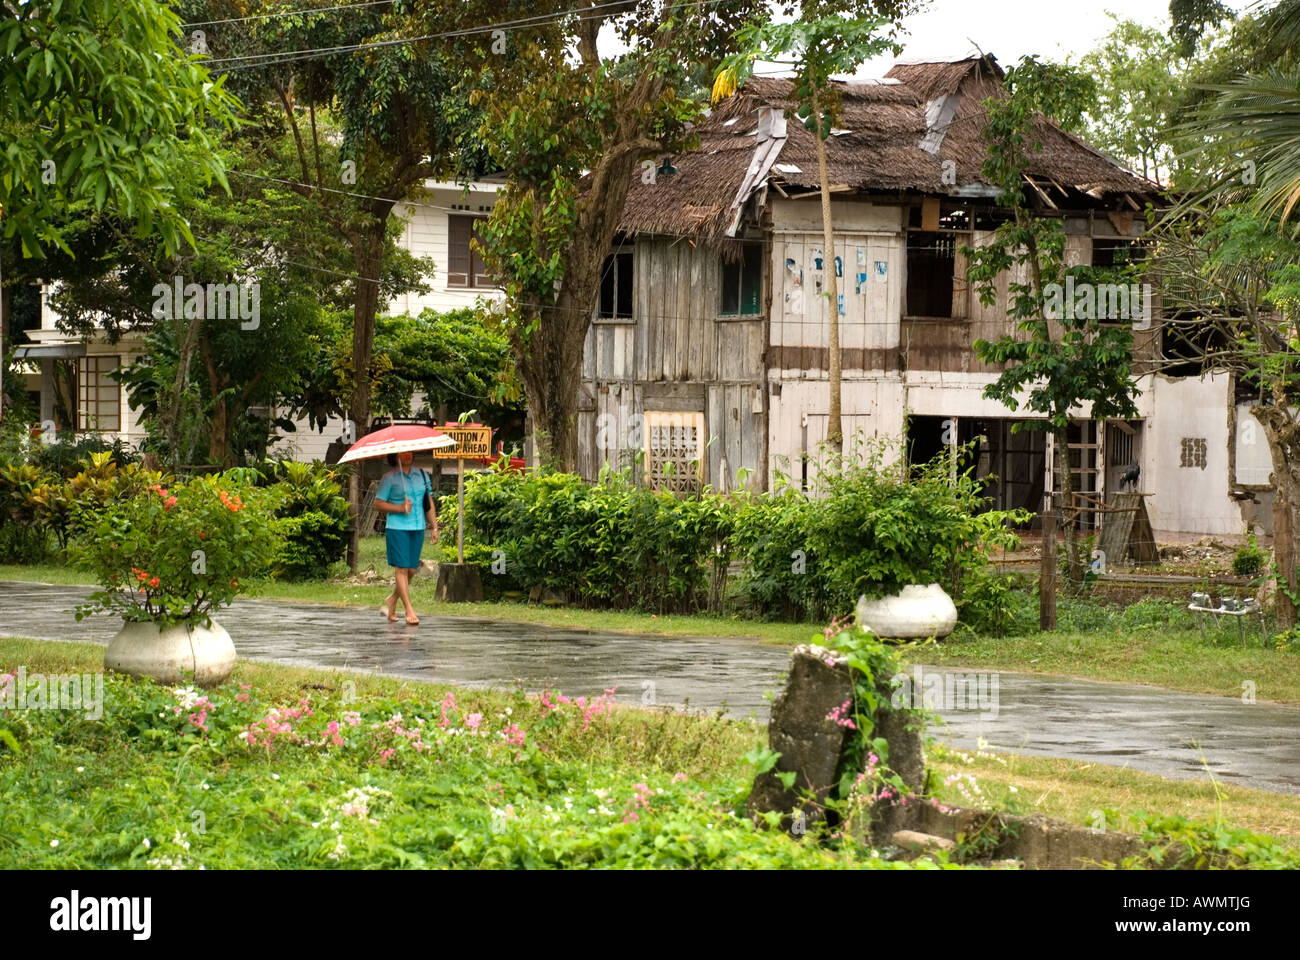 philippines island siquijor town old wooden house Stock Photo